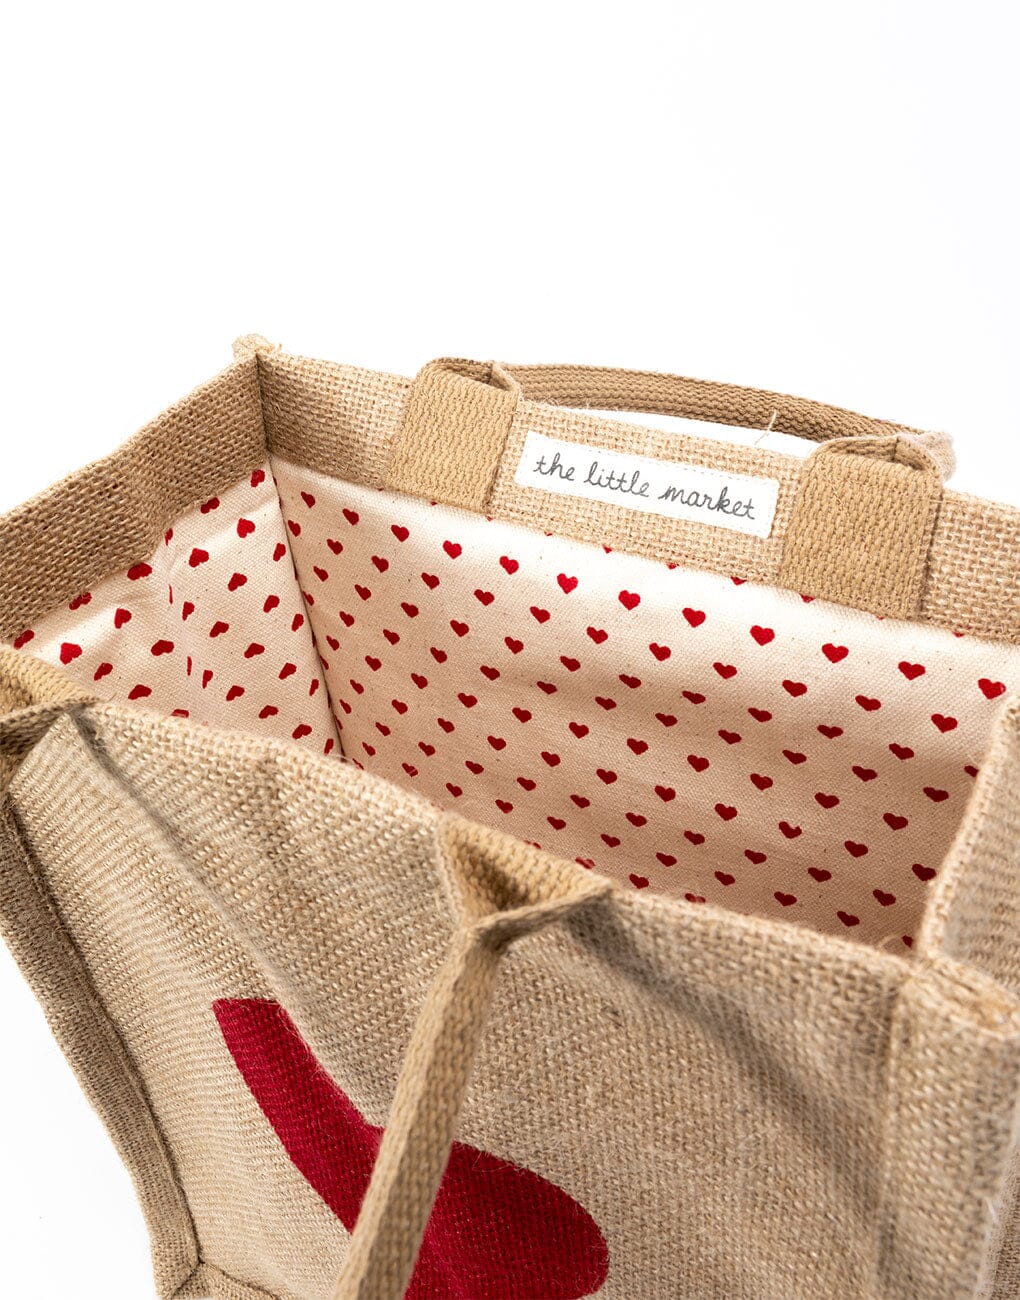 Red Heart Medium Gift Tote Bag with Red Heart-Dot Canvas Interior | The Little Market